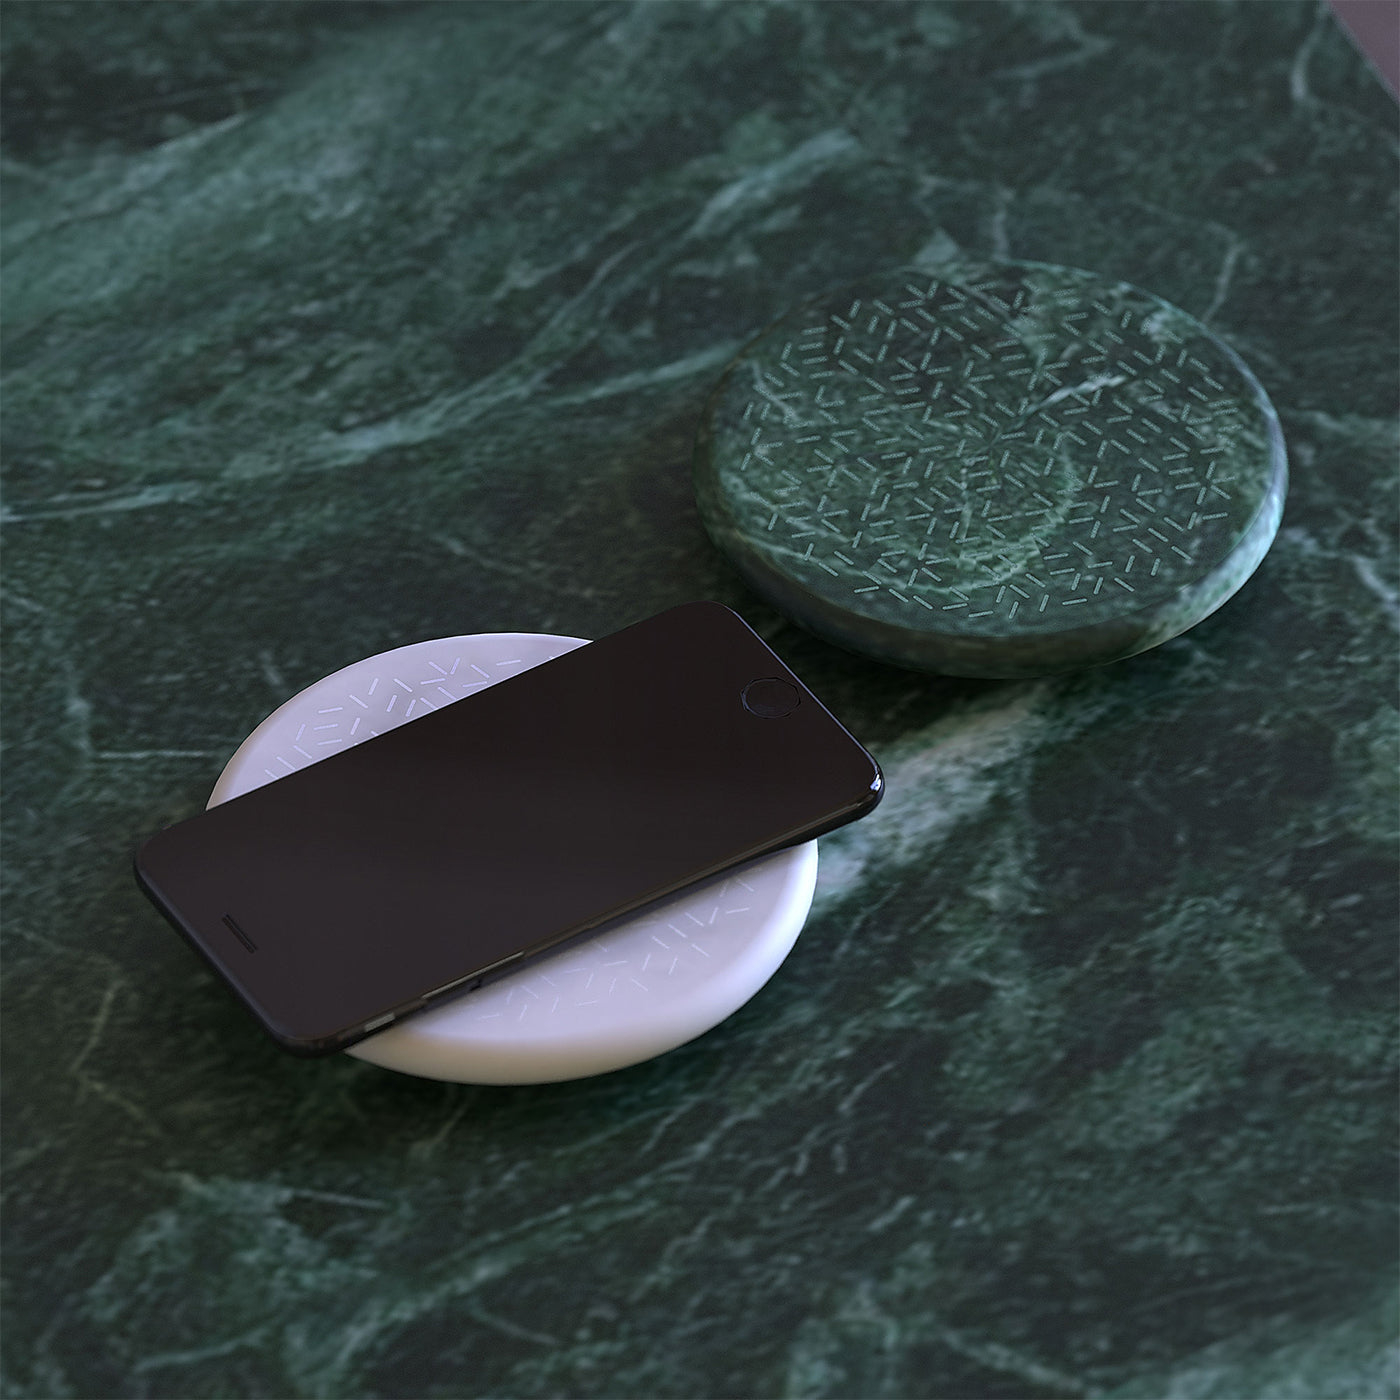 Selce Carrara Wireless Phone Charger by Efrem Bonacina and Andrea Teoldi - Alternative view 1